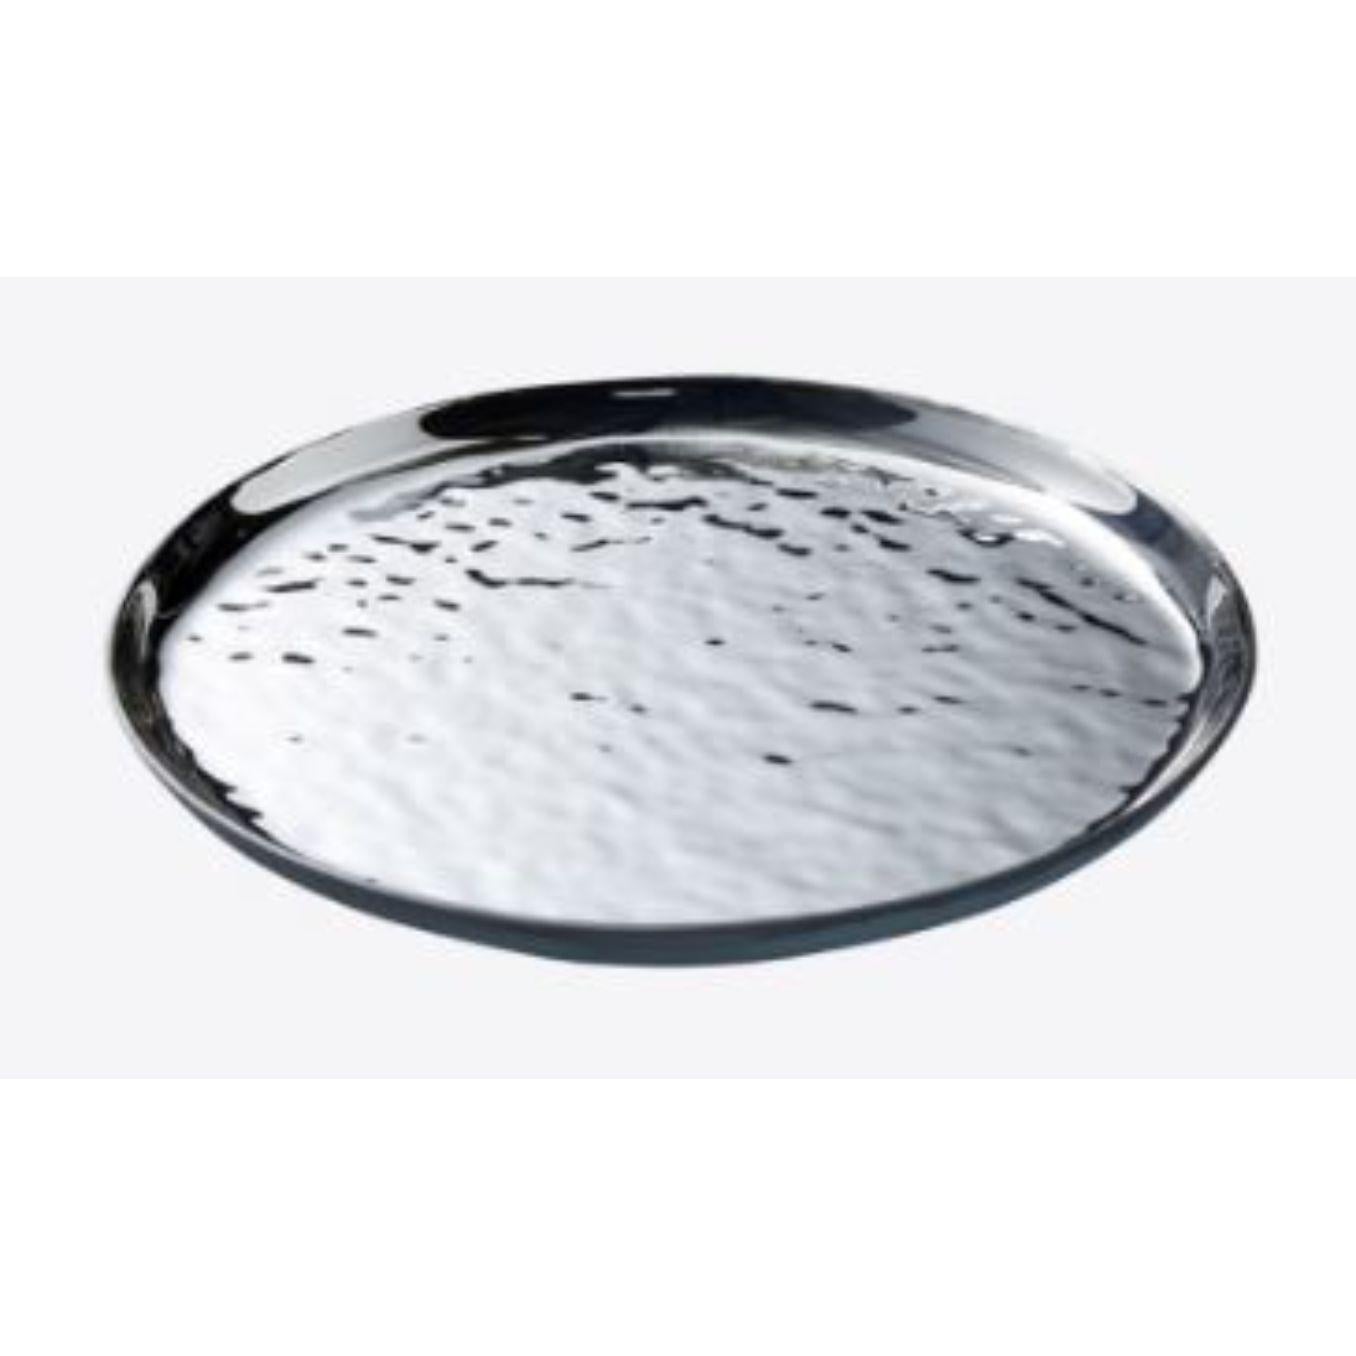 Mirage round tray by Radar
Design: Bastien Taillard
Materials: glass.
Dimensions: D 50 x W 50 x H 3 cm
Available in silver, gold or Iris finish.

Elegant, timeless, understated. The RADAR collection allows you to take a welcome break from the